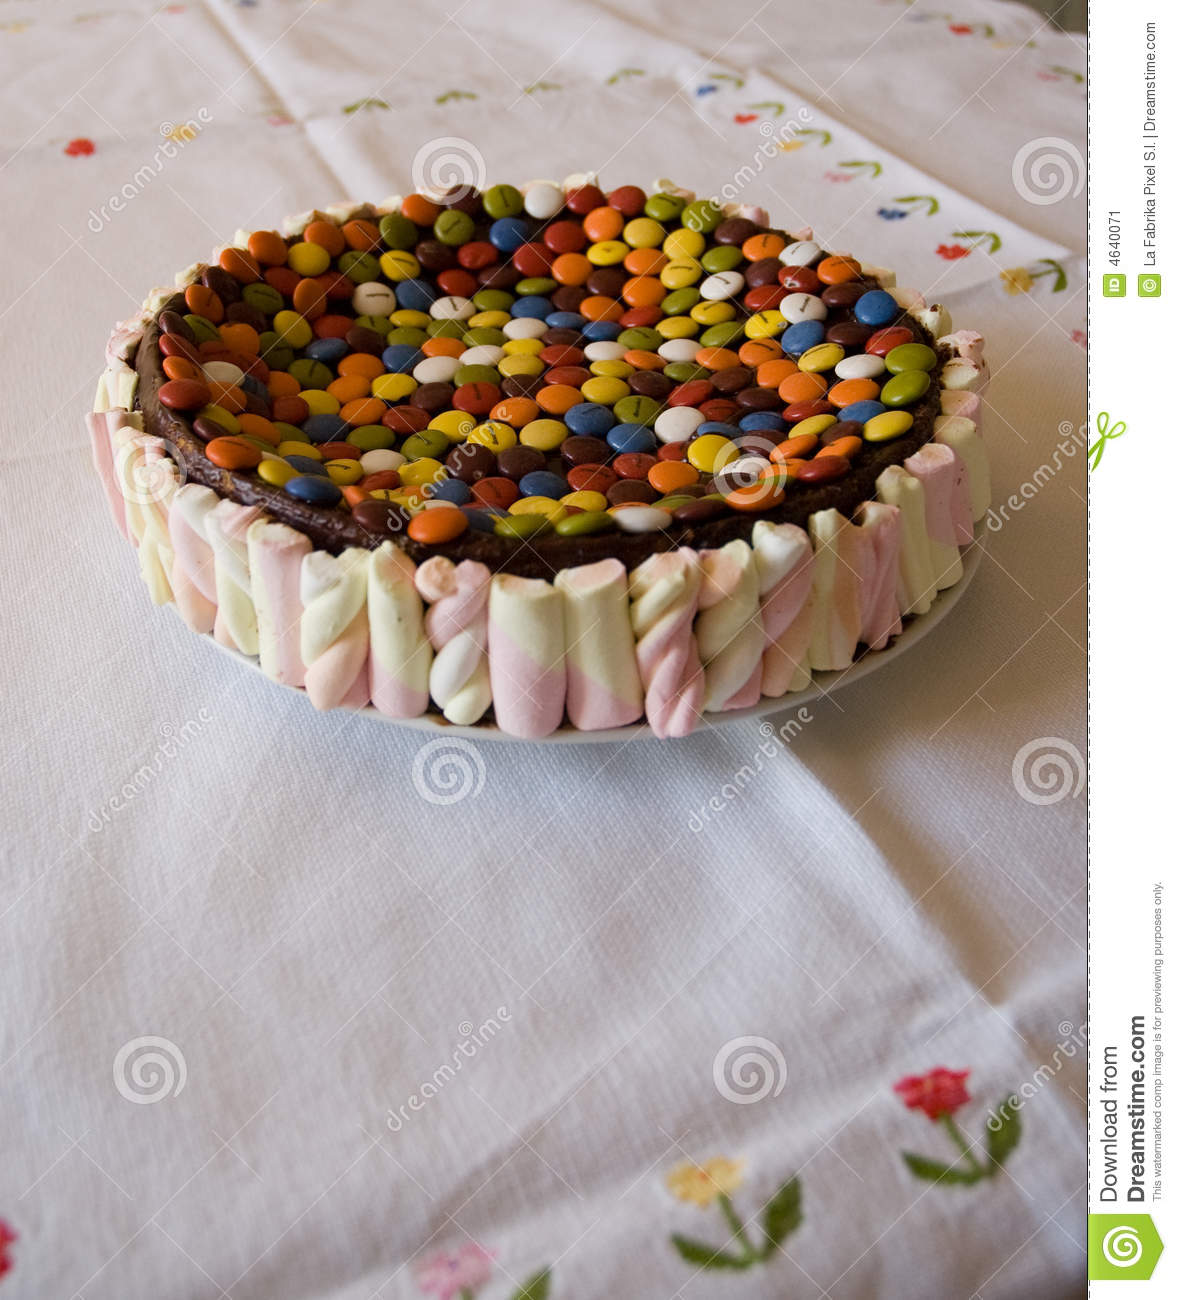 Chocolate Cake with Candy